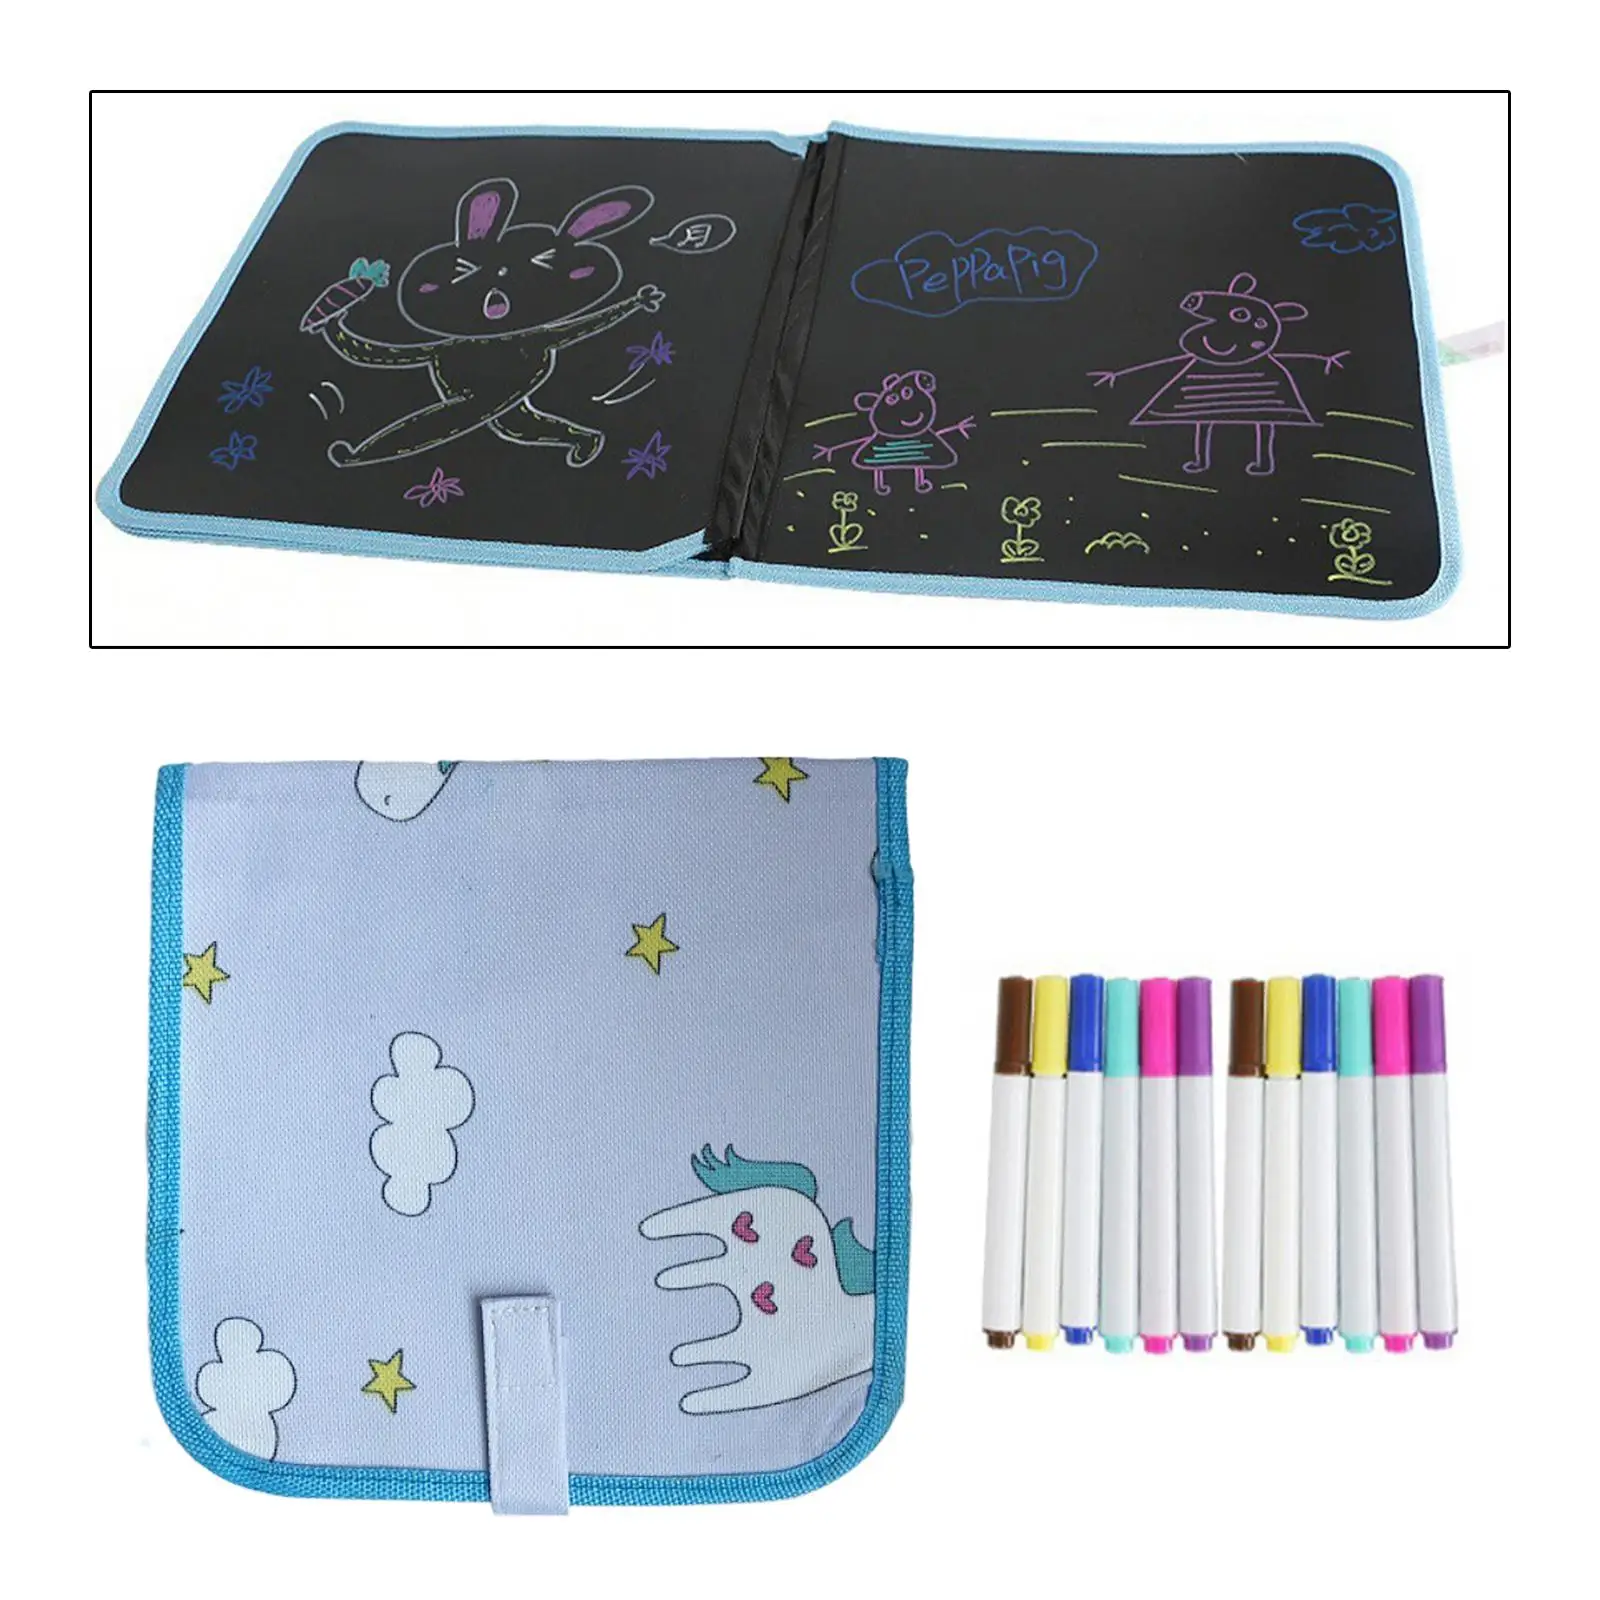 Erasable Doodle Book with 12 Colored Pens 14 Page Drawing Erasable Drawing Pad for Toddlers 2 3 4 5 6 7 8 Year Old Kids Children